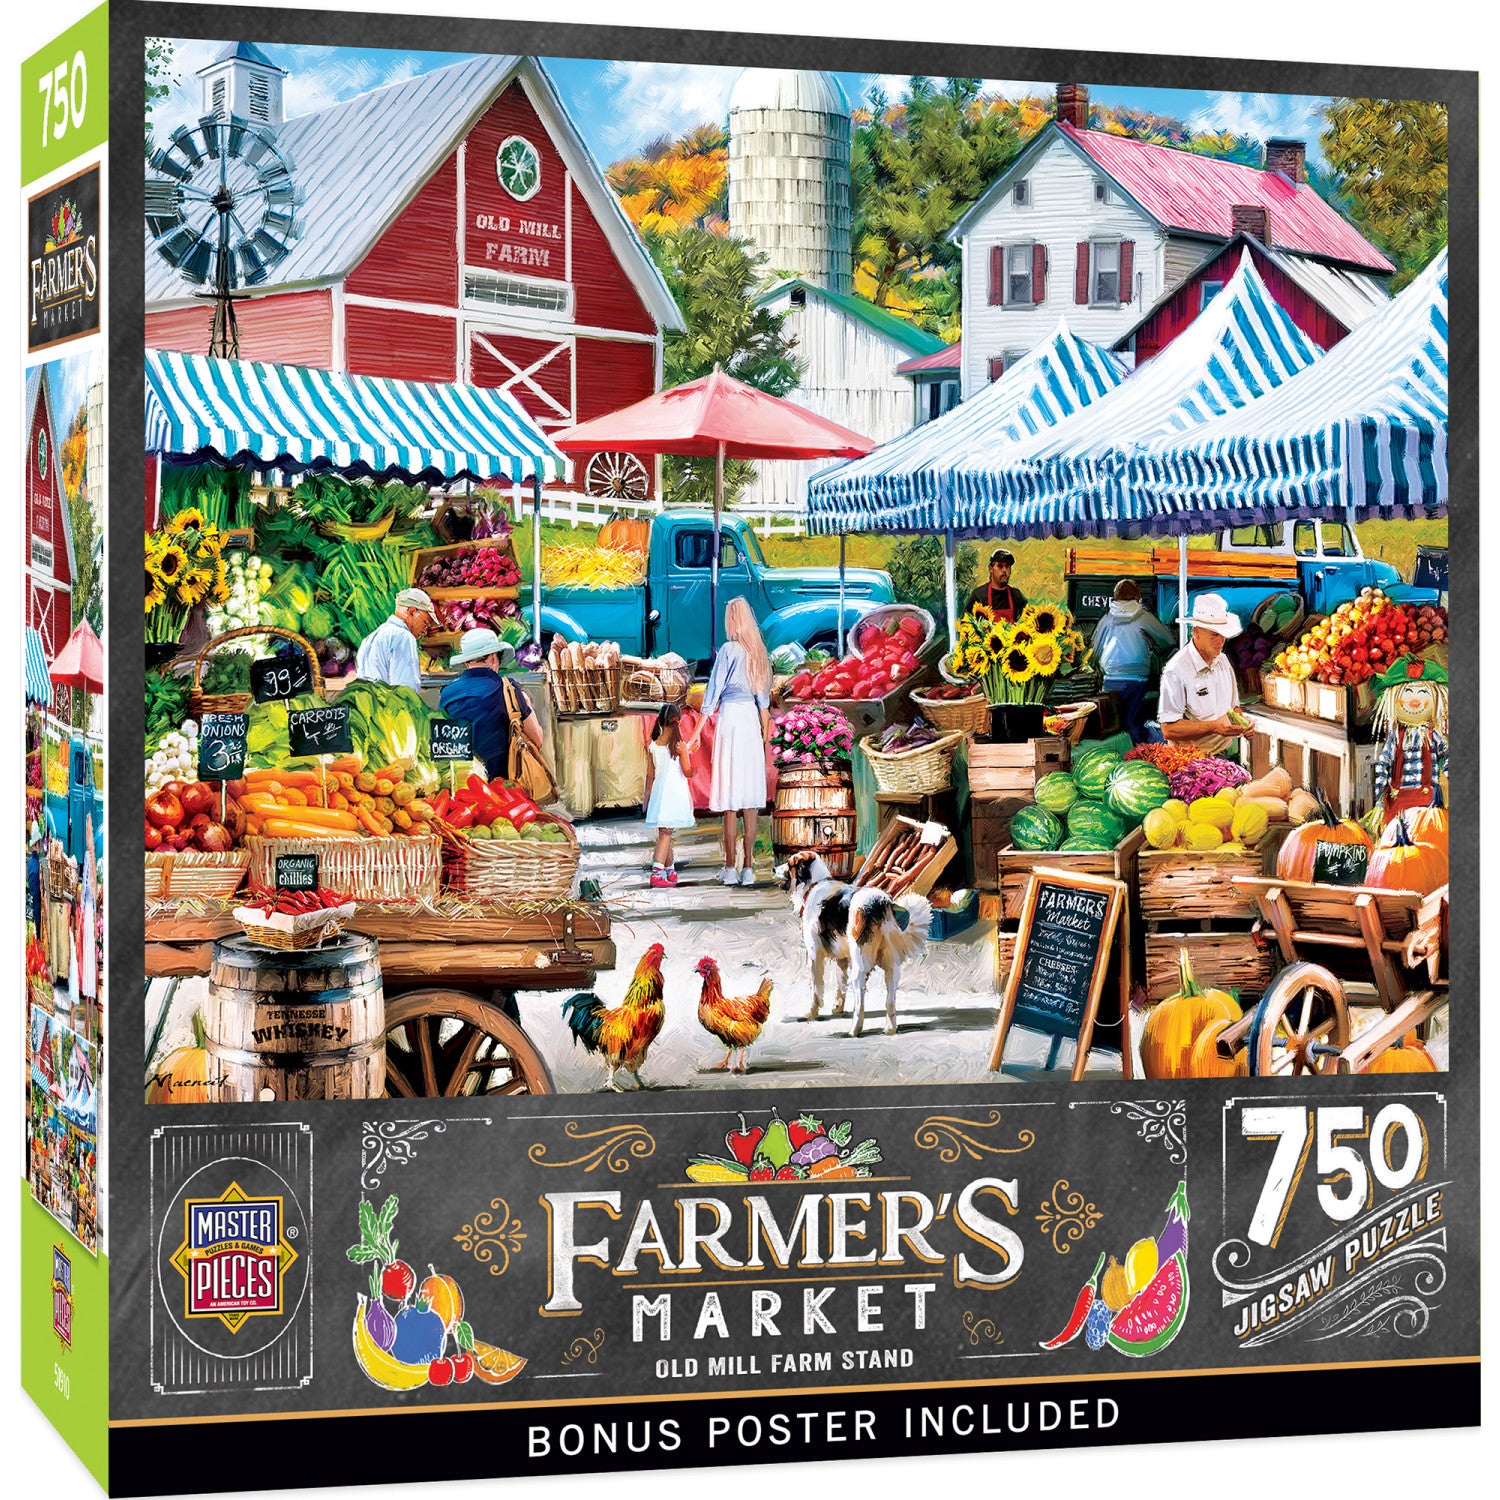 Farmer's Market - Old Mill Farm Stand 750 Piece Puzzle